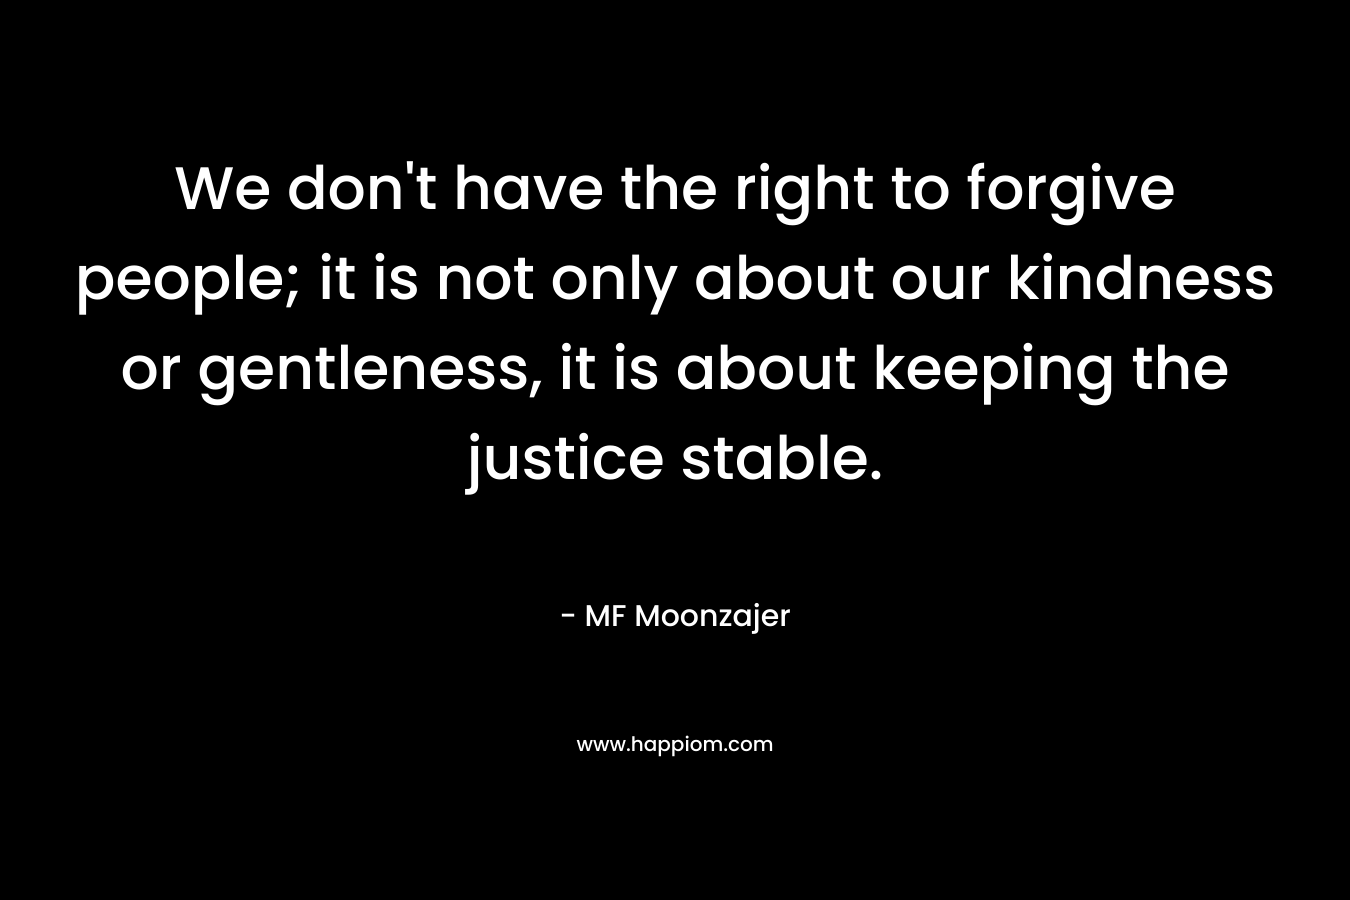 We don’t have the right to forgive people; it is not only about our kindness or gentleness, it is about keeping the justice stable. – MF Moonzajer